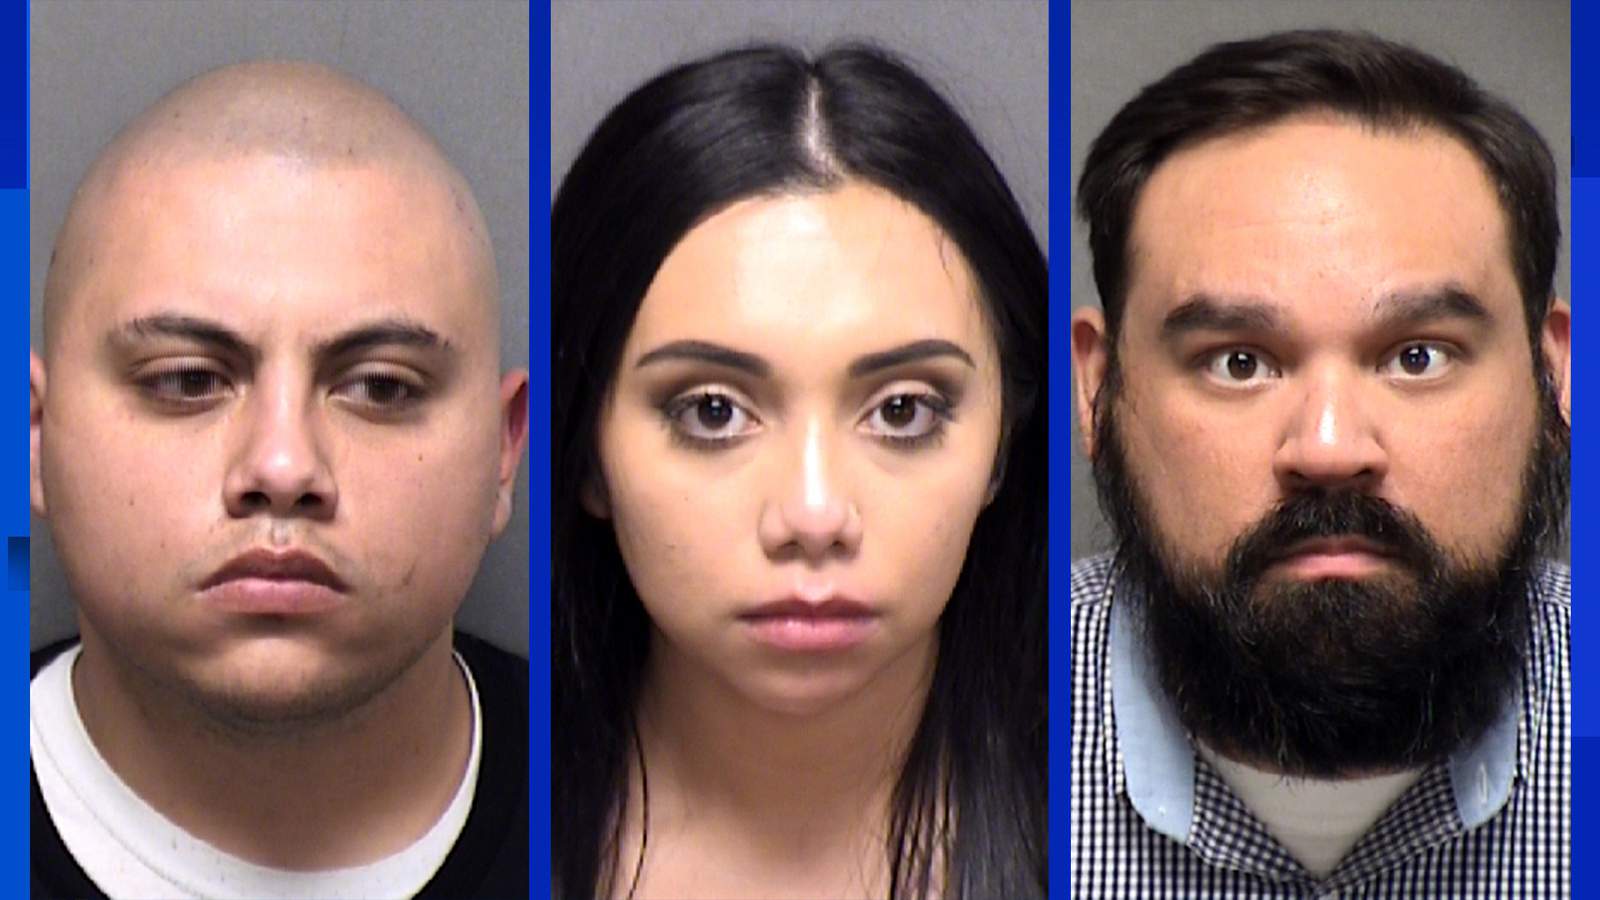 Derek Medina (left), Kaley Medina (middle) and Daniel Serna (right) have been charged with aggravated assault following a shooting at the Monte Carlo Club on Sunday, June 14, 2020.